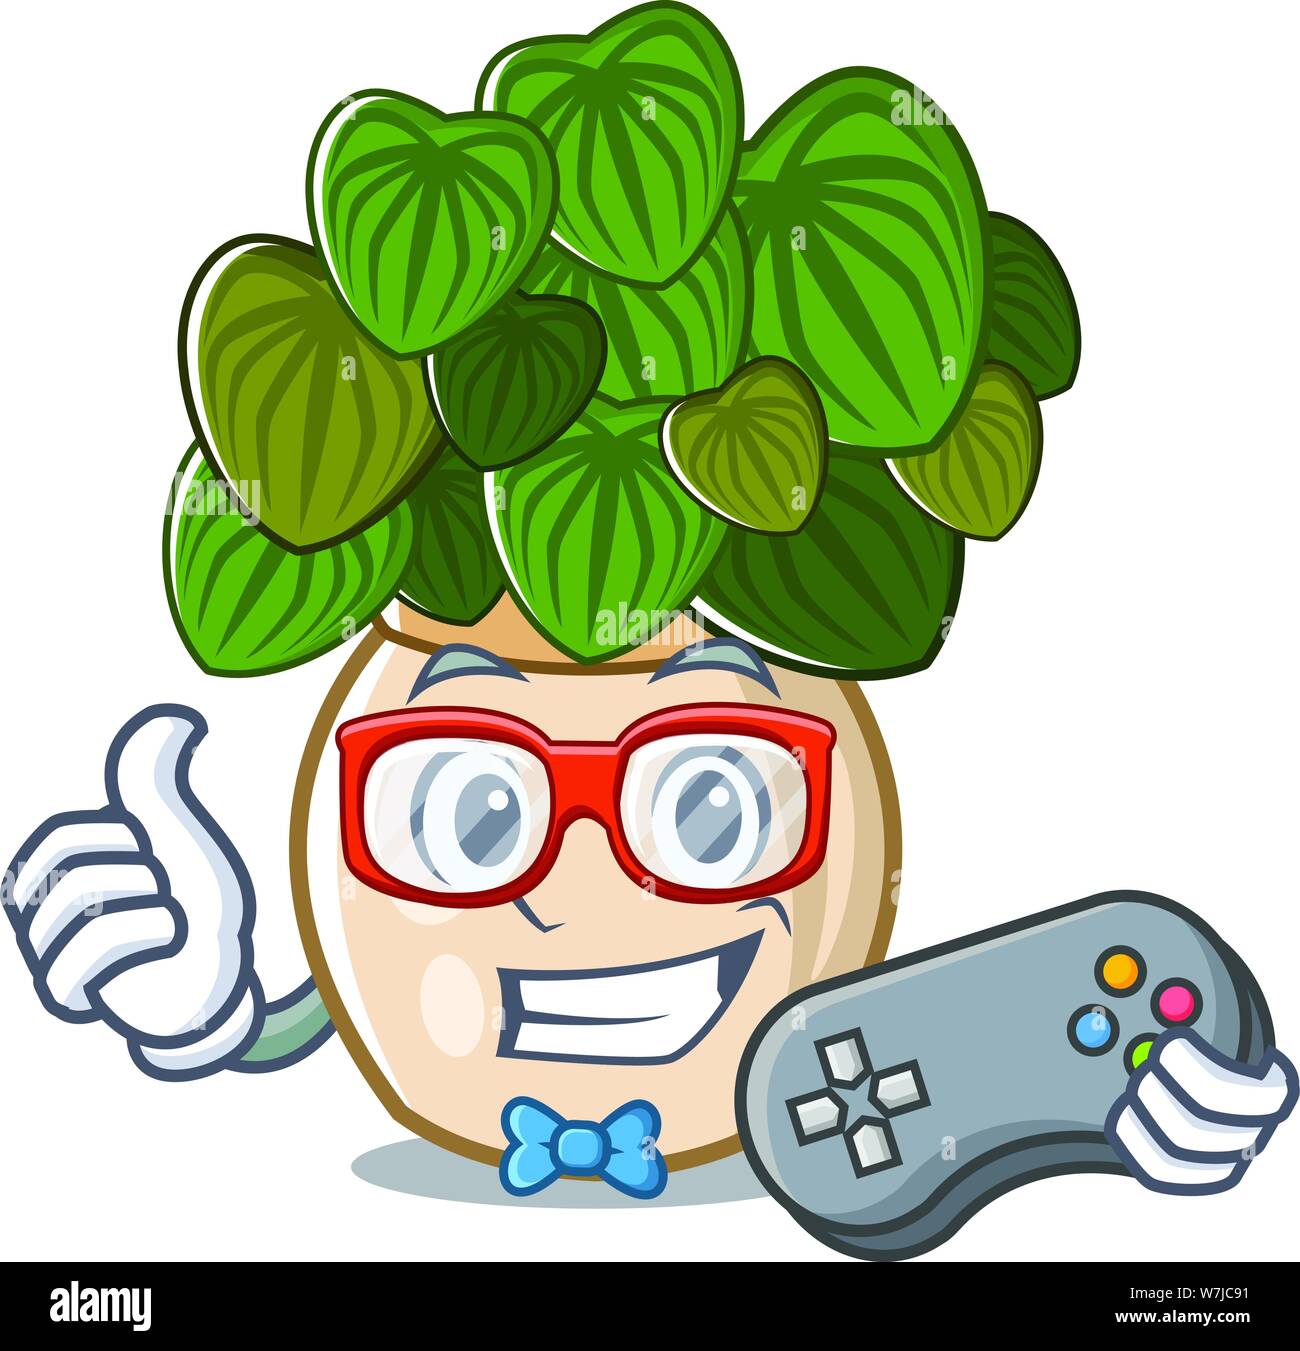 Gamer peperomia spreads on the cartoon stems Stock Vector